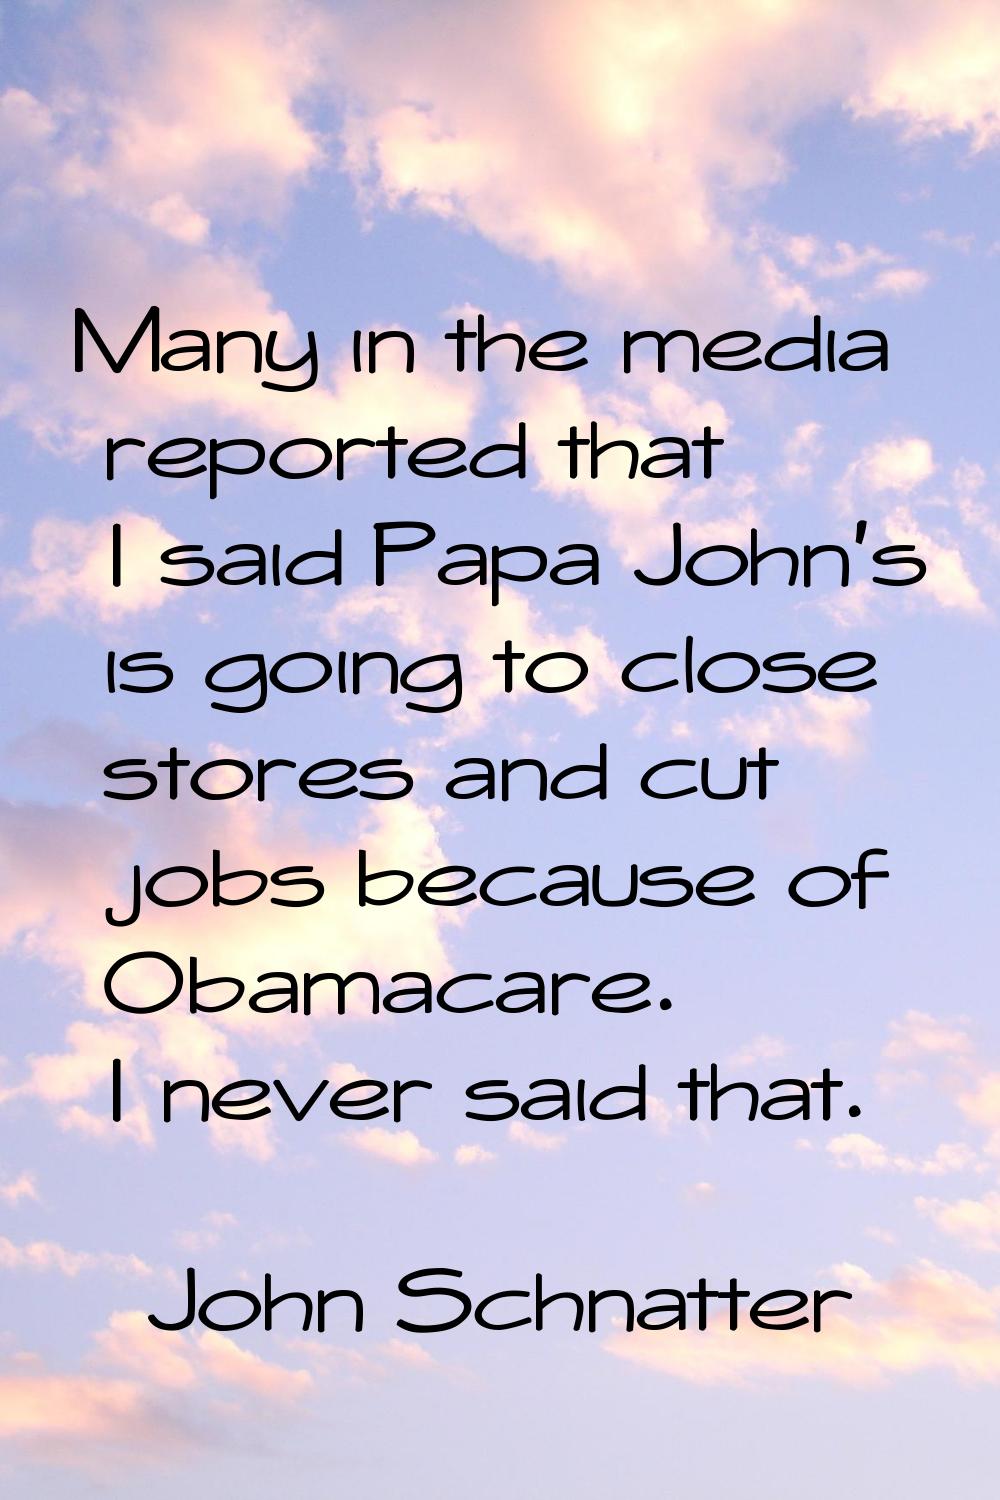 Many in the media reported that I said Papa John's is going to close stores and cut jobs because of